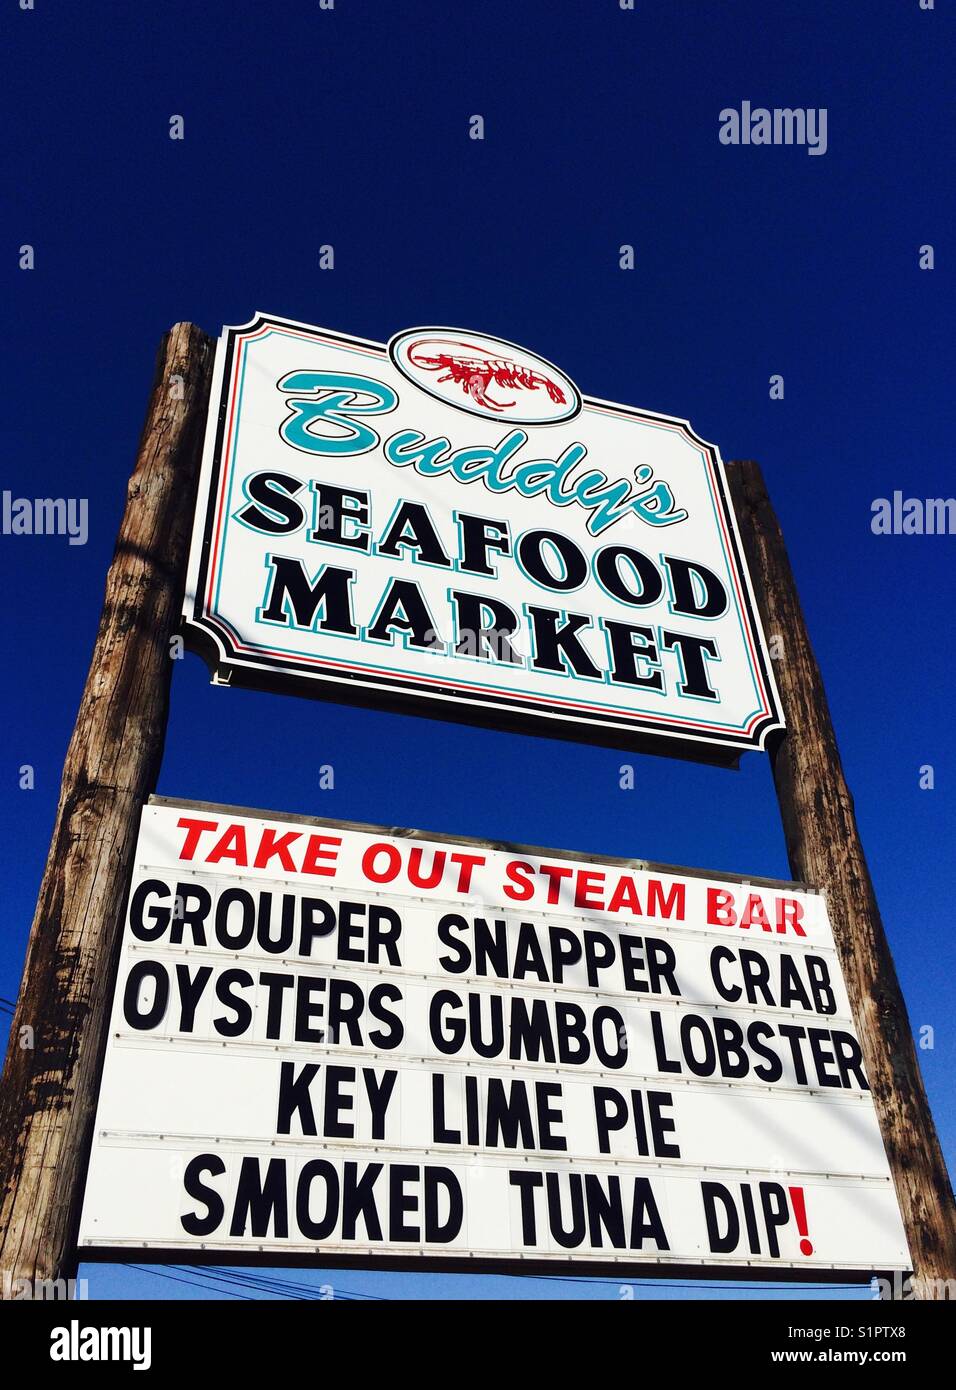 Sign for Buddy's Seafood Market in Panama City Beach, Florida, USA. Stock Photo